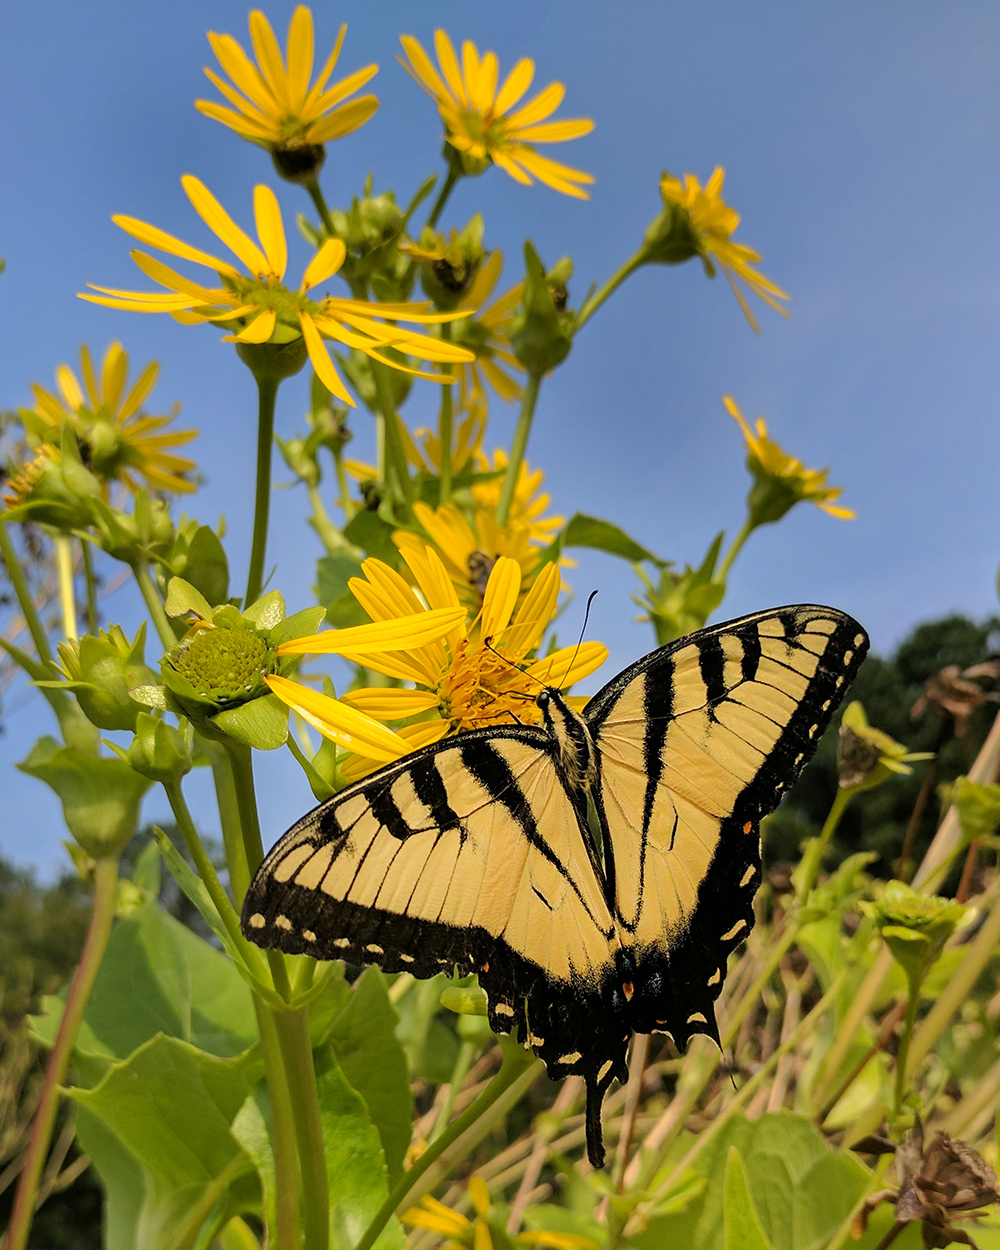 Eastern tiger swallowtail on cup plant